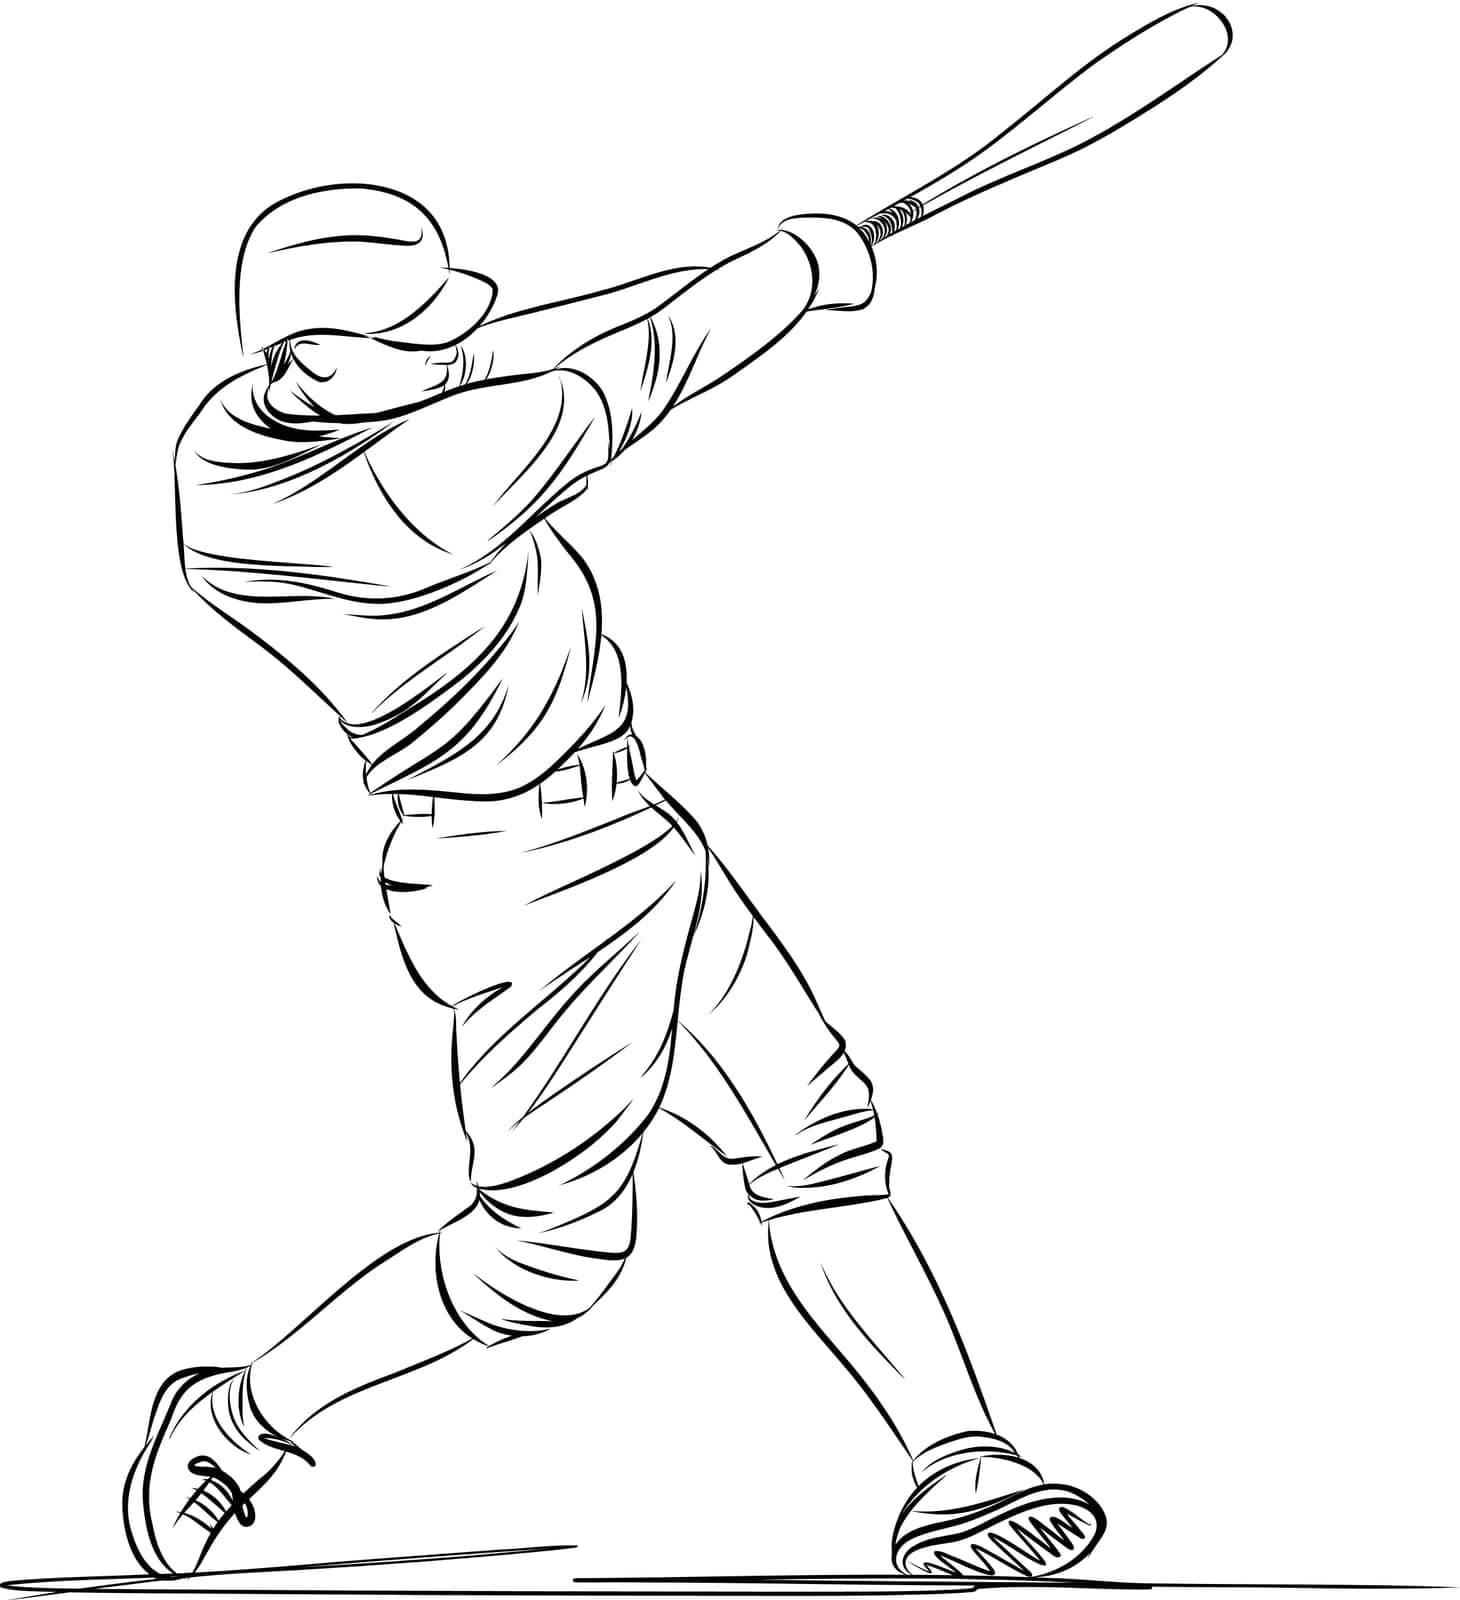 Baseball players in dynamic action in action sketch illustration